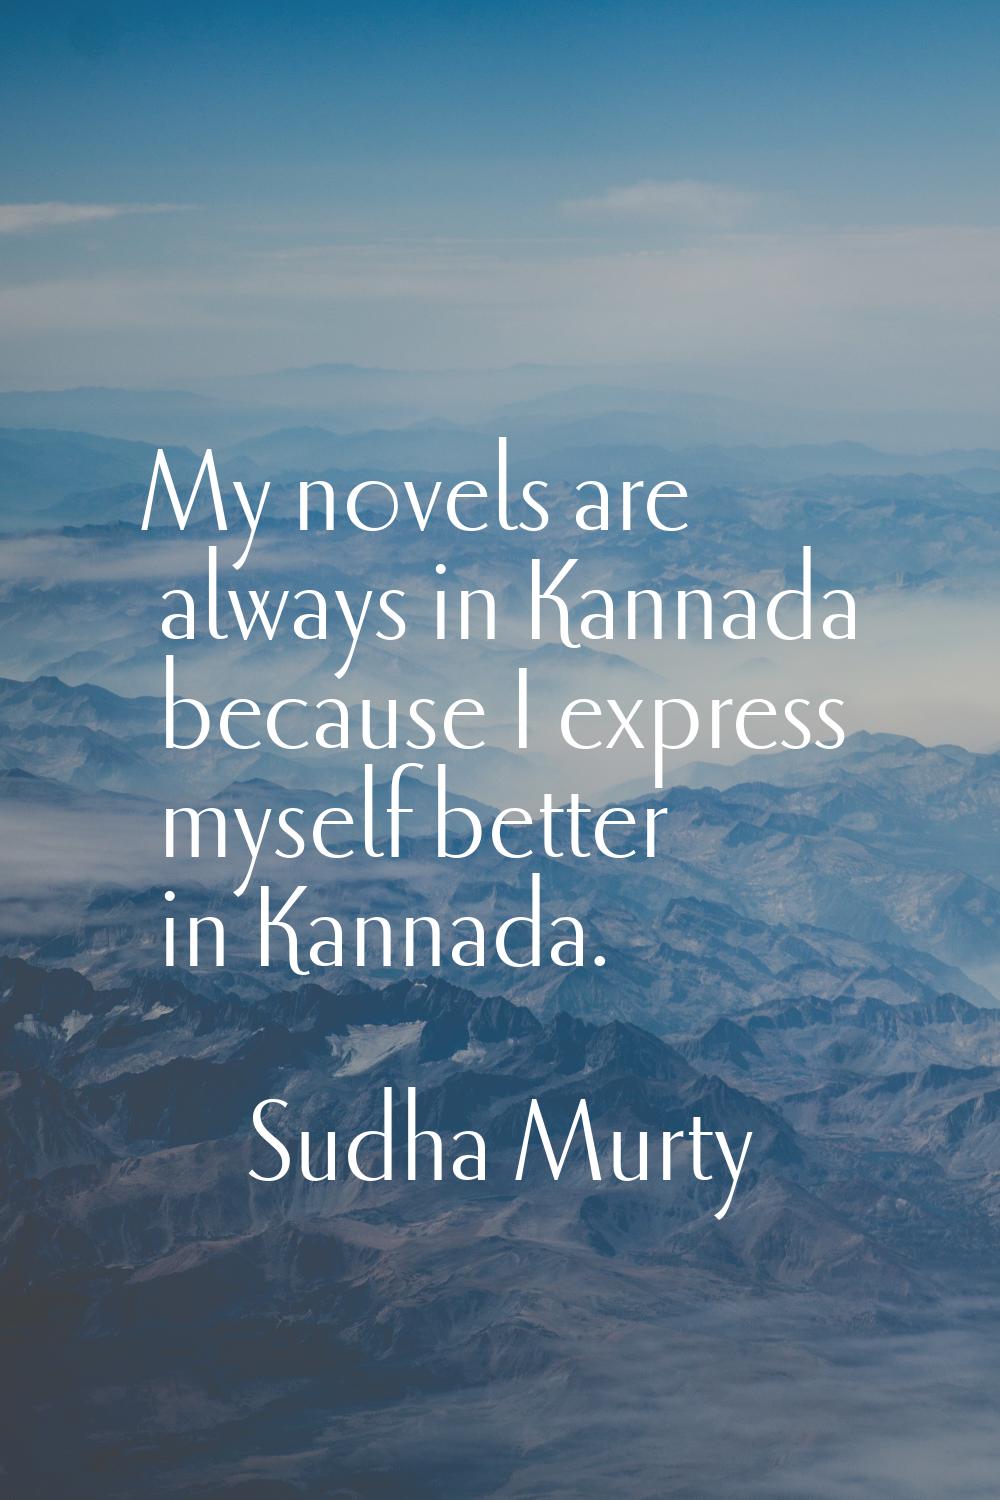 My novels are always in Kannada because I express myself better in Kannada.